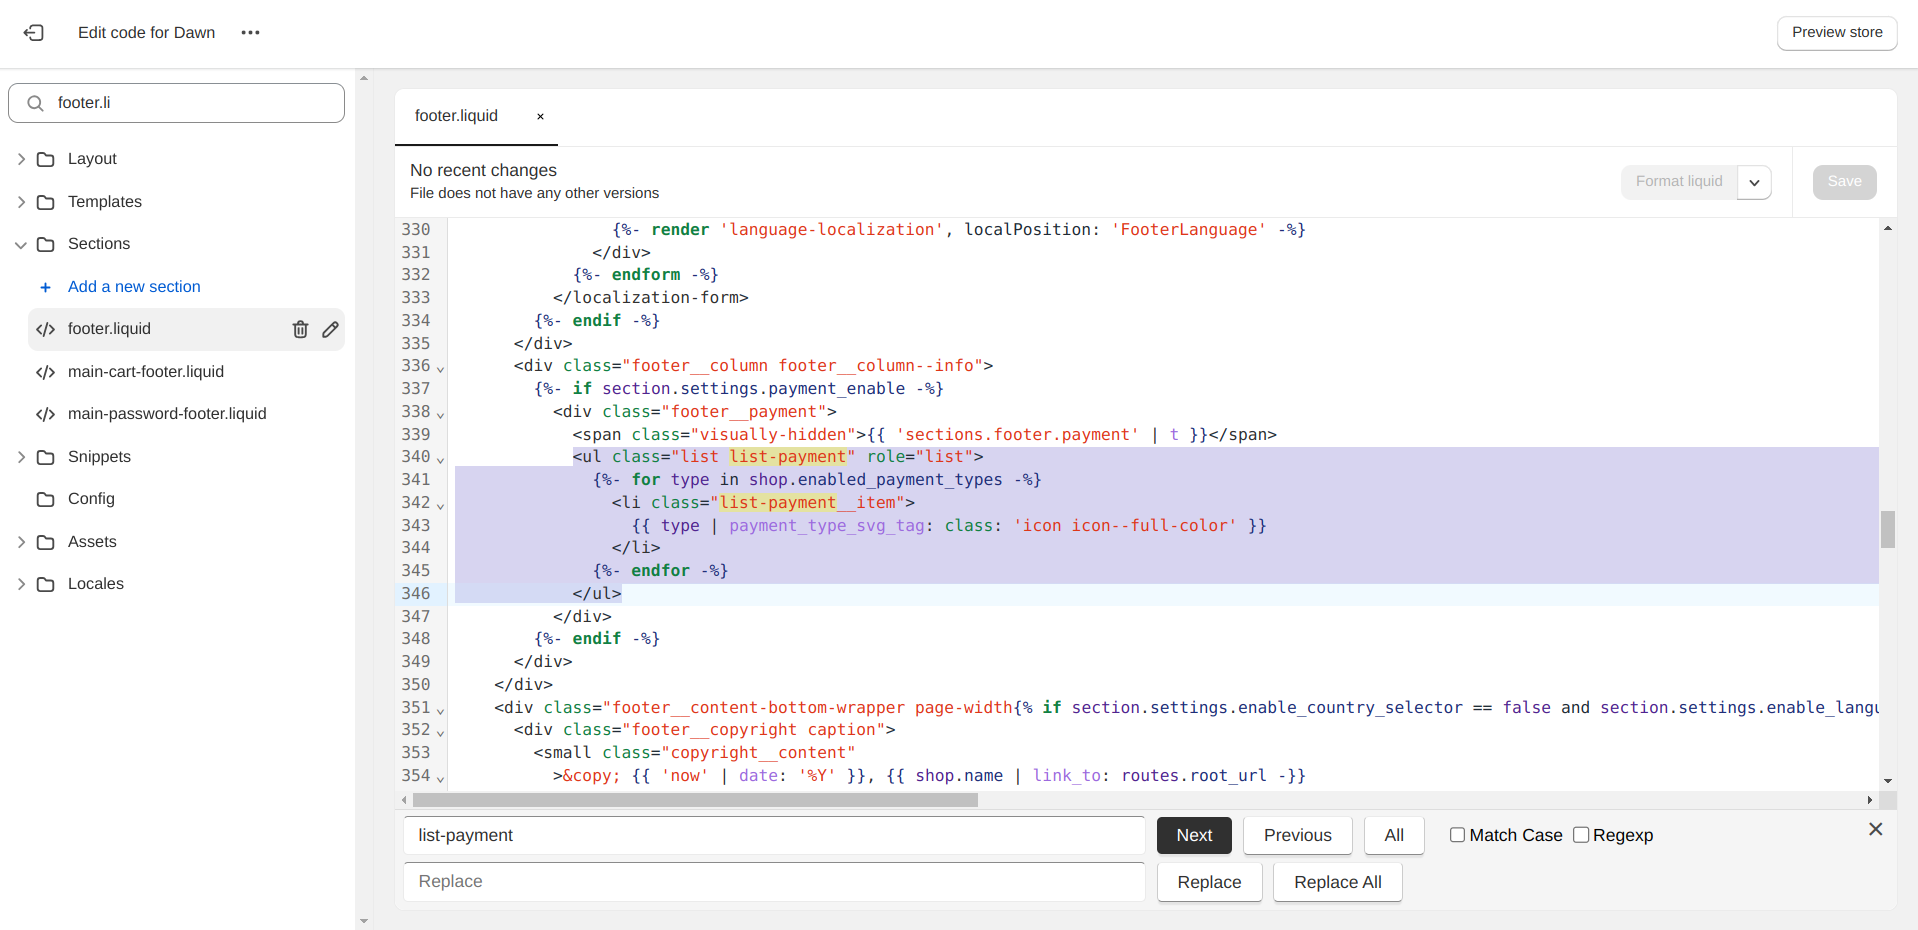 Shopify's code editor